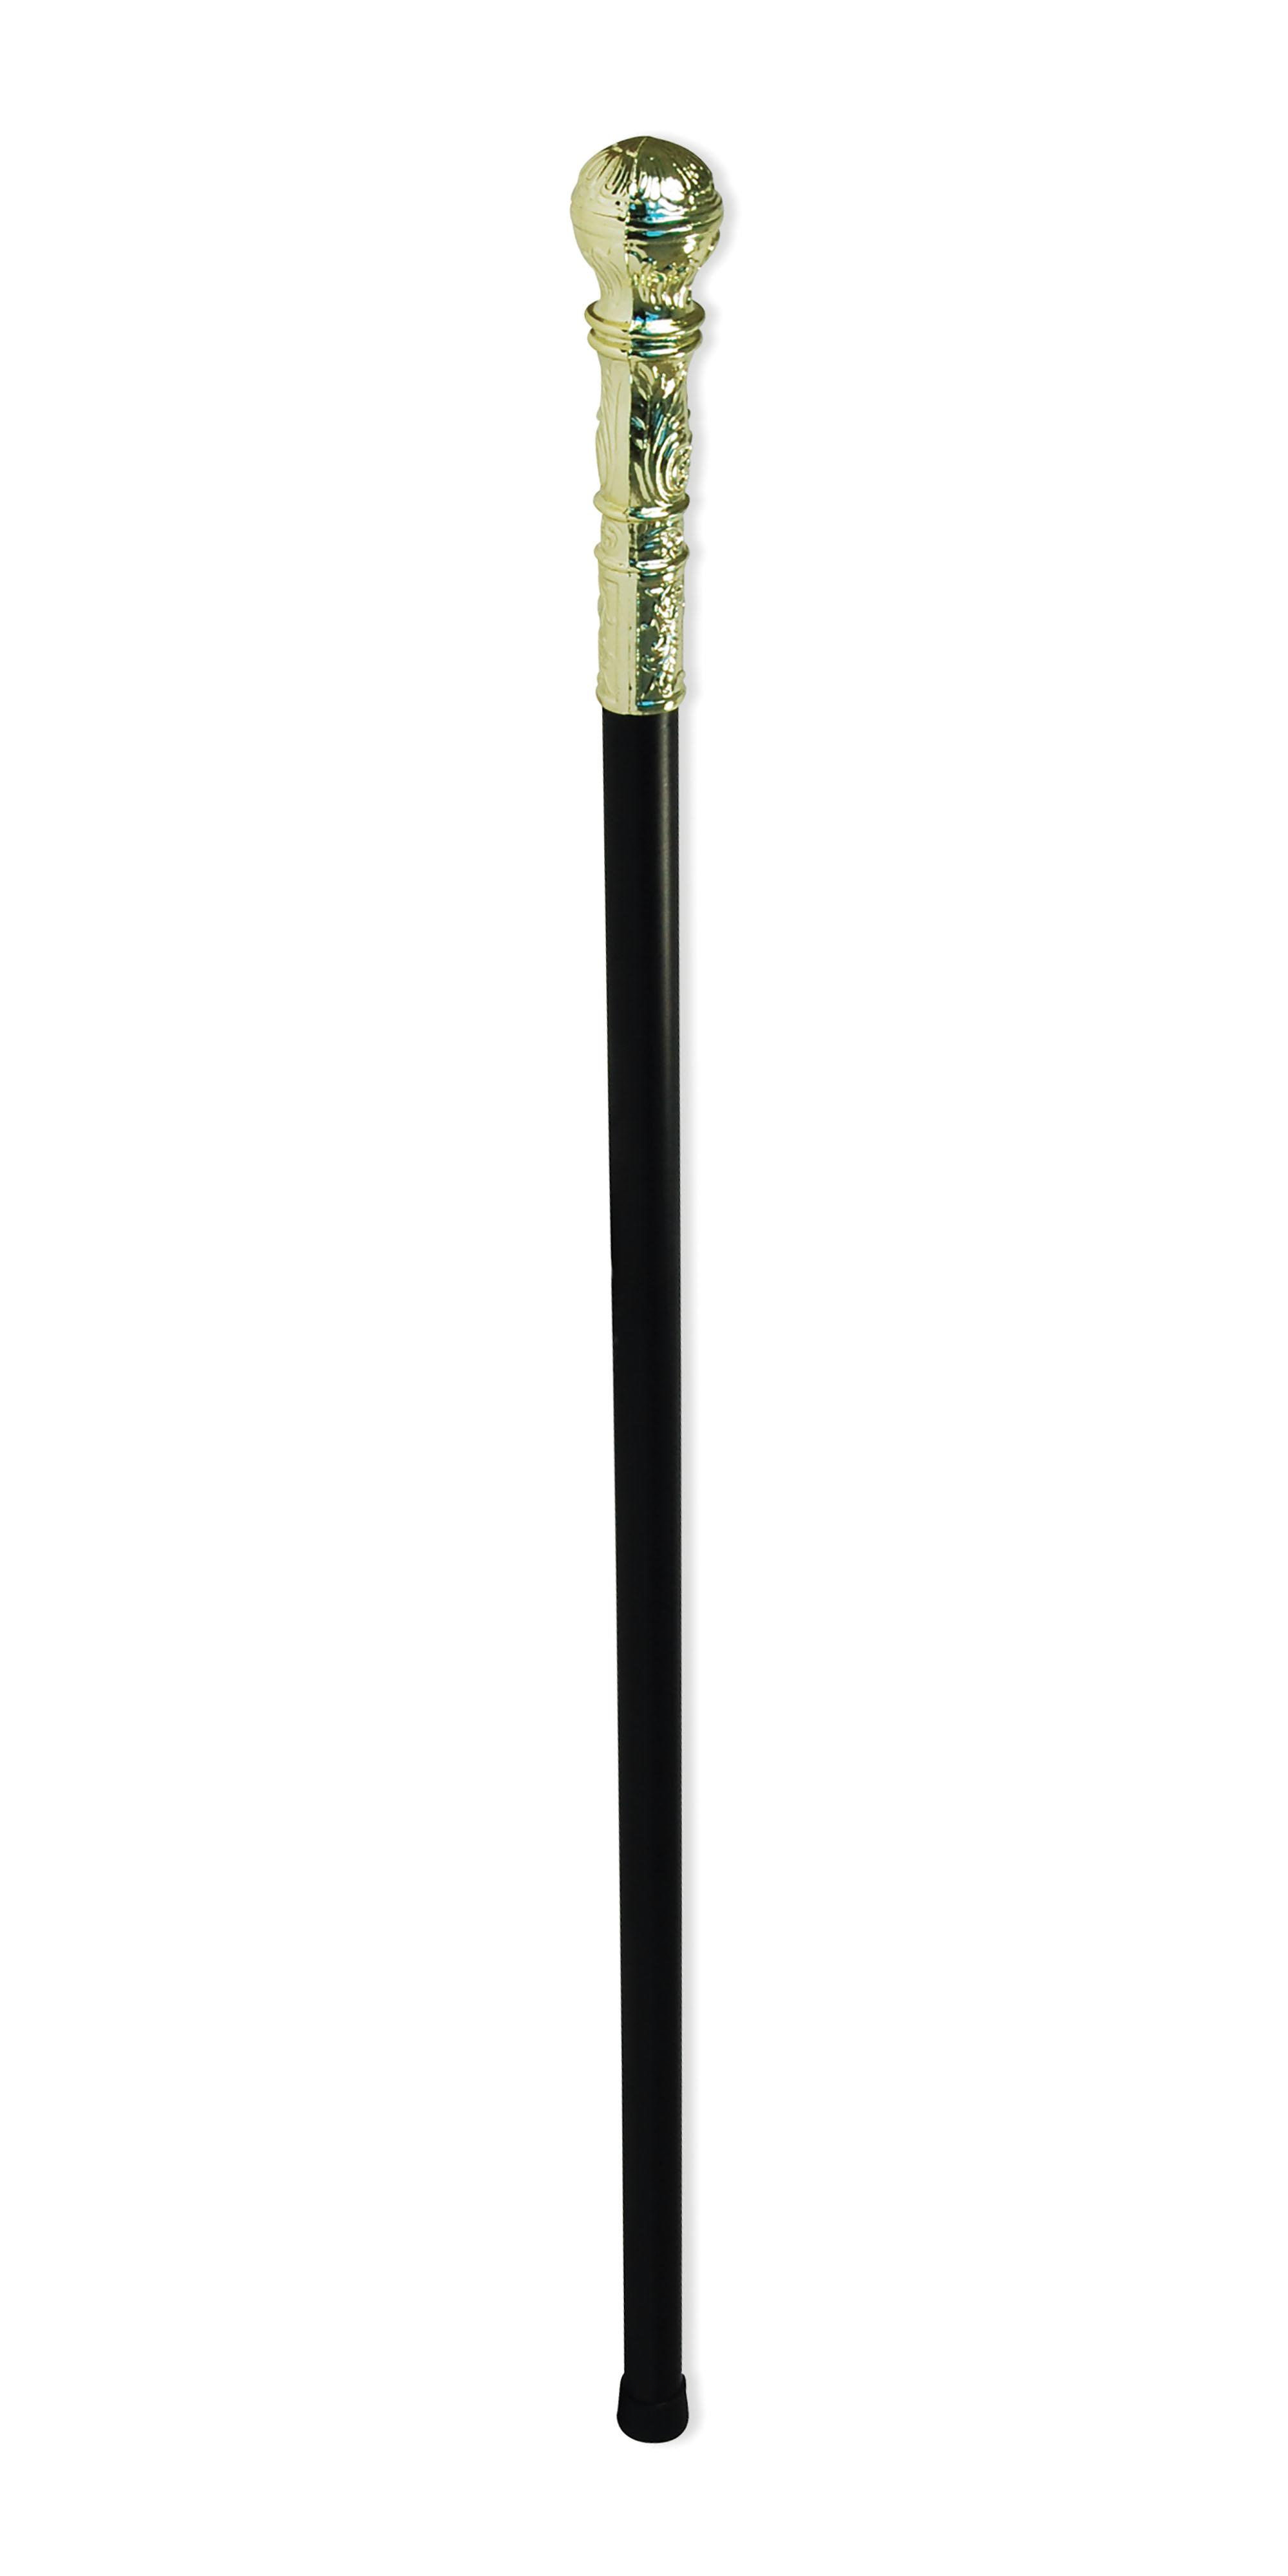 Cane with Gold Ball Handle